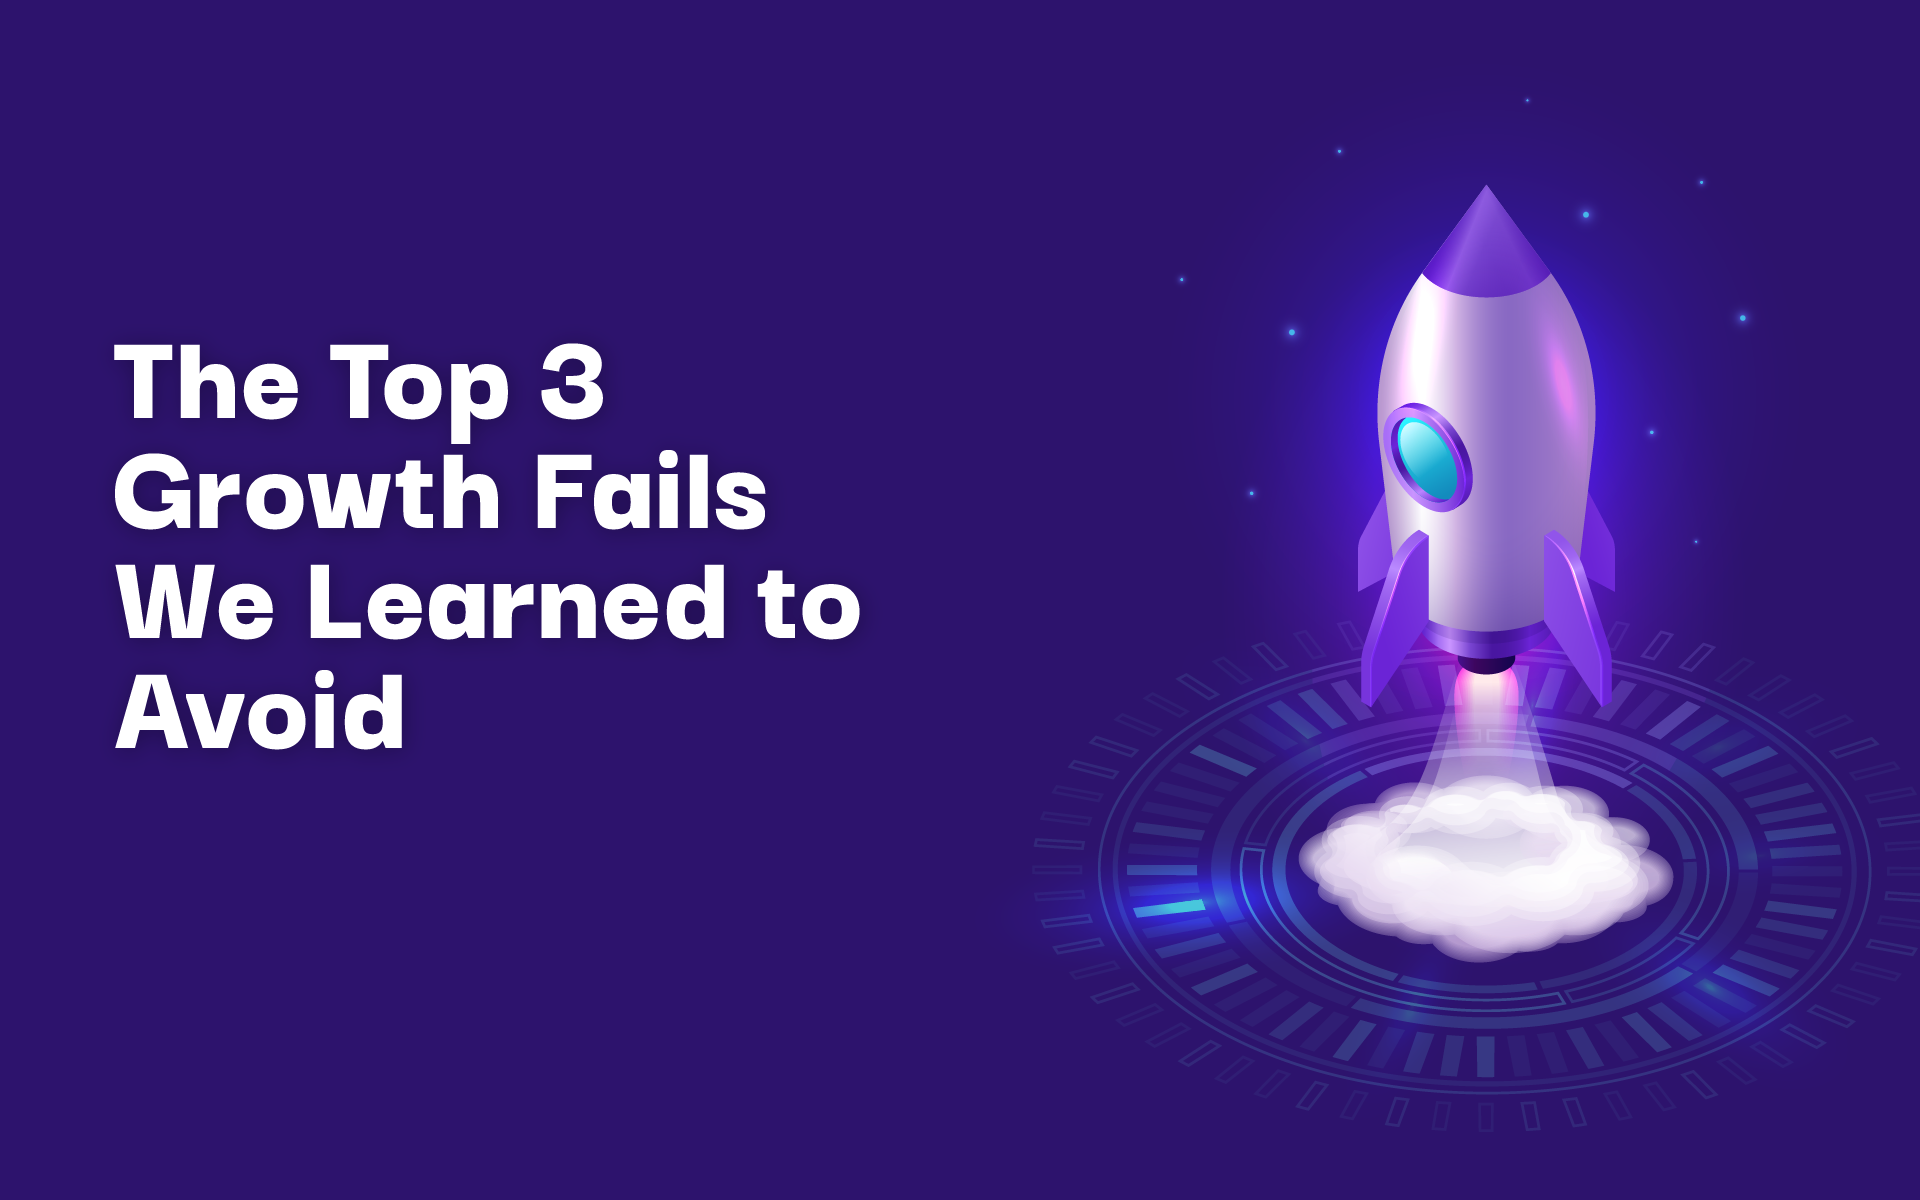 Growth Fails We Learned to Avoid